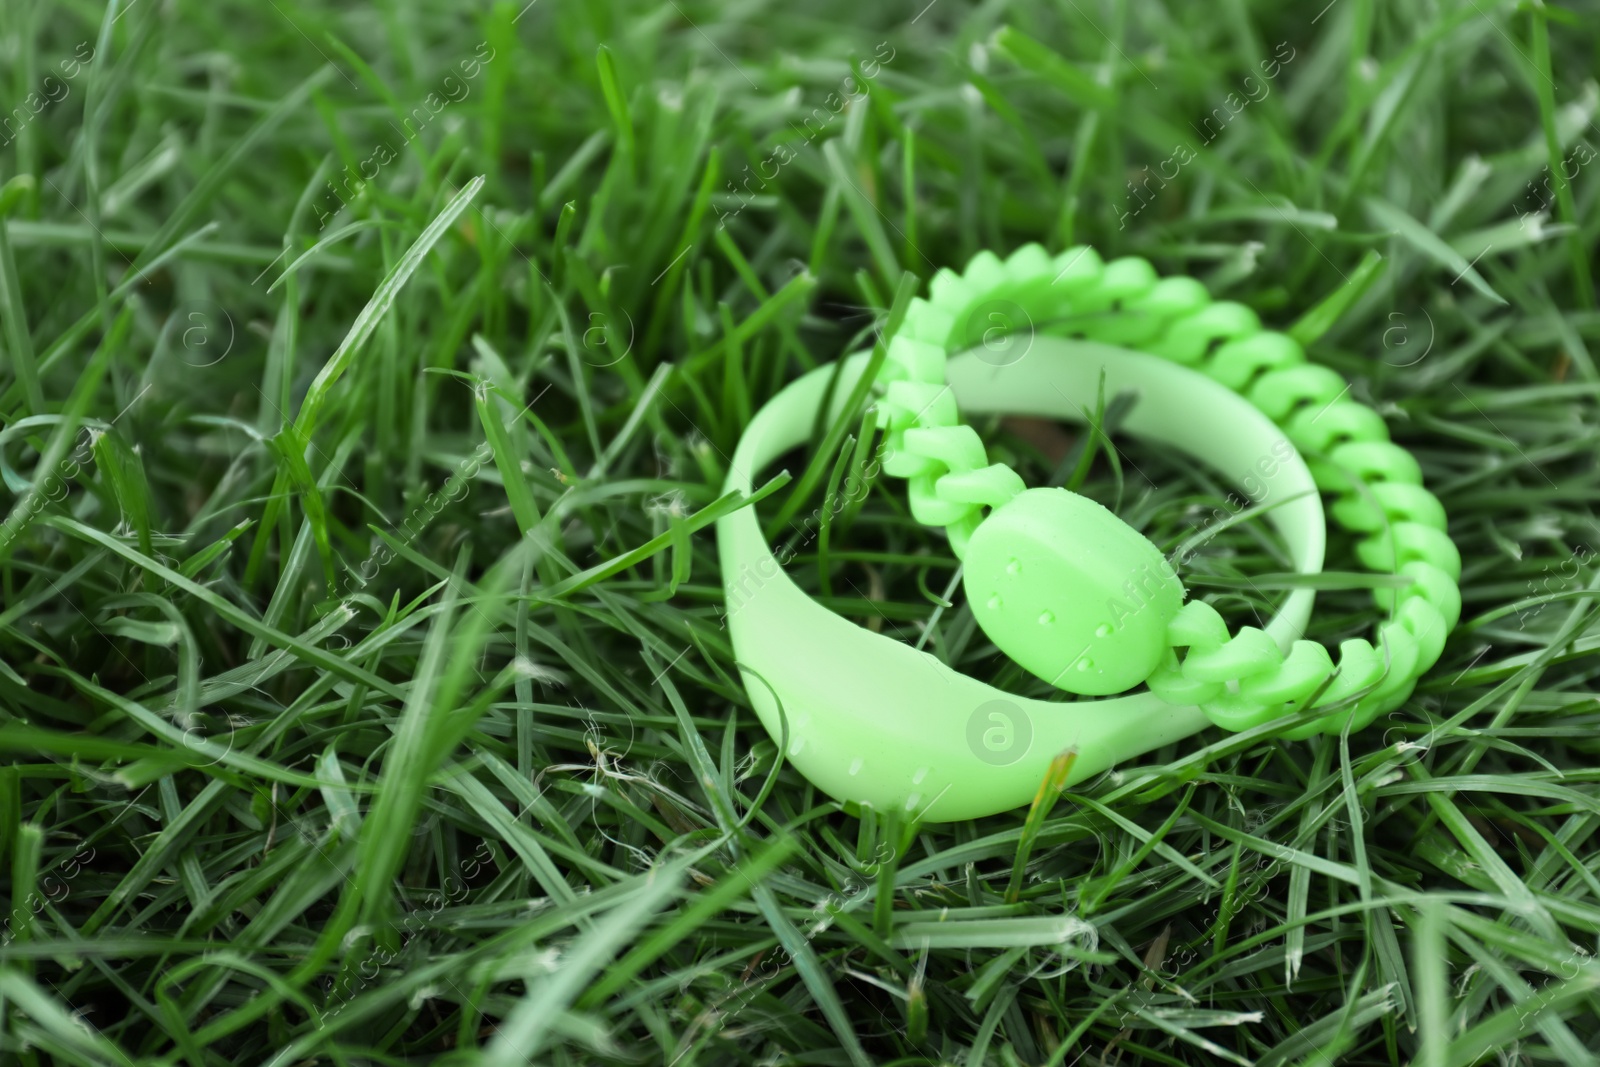 Photo of Insect repellent wrist bands on grass outdoors